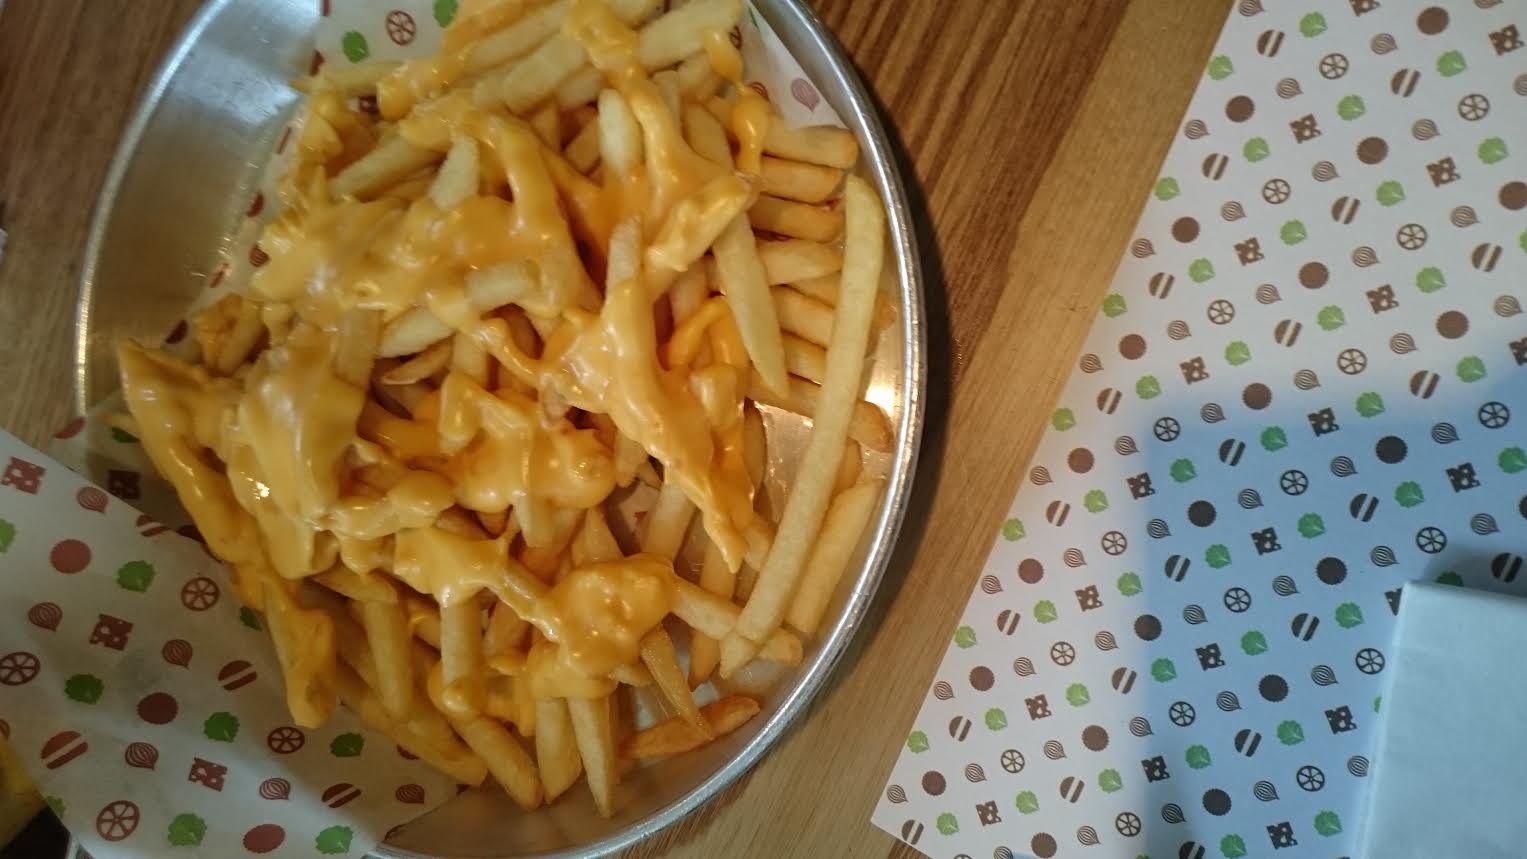 Cheese fries are highly recommended for those who love their cheese!